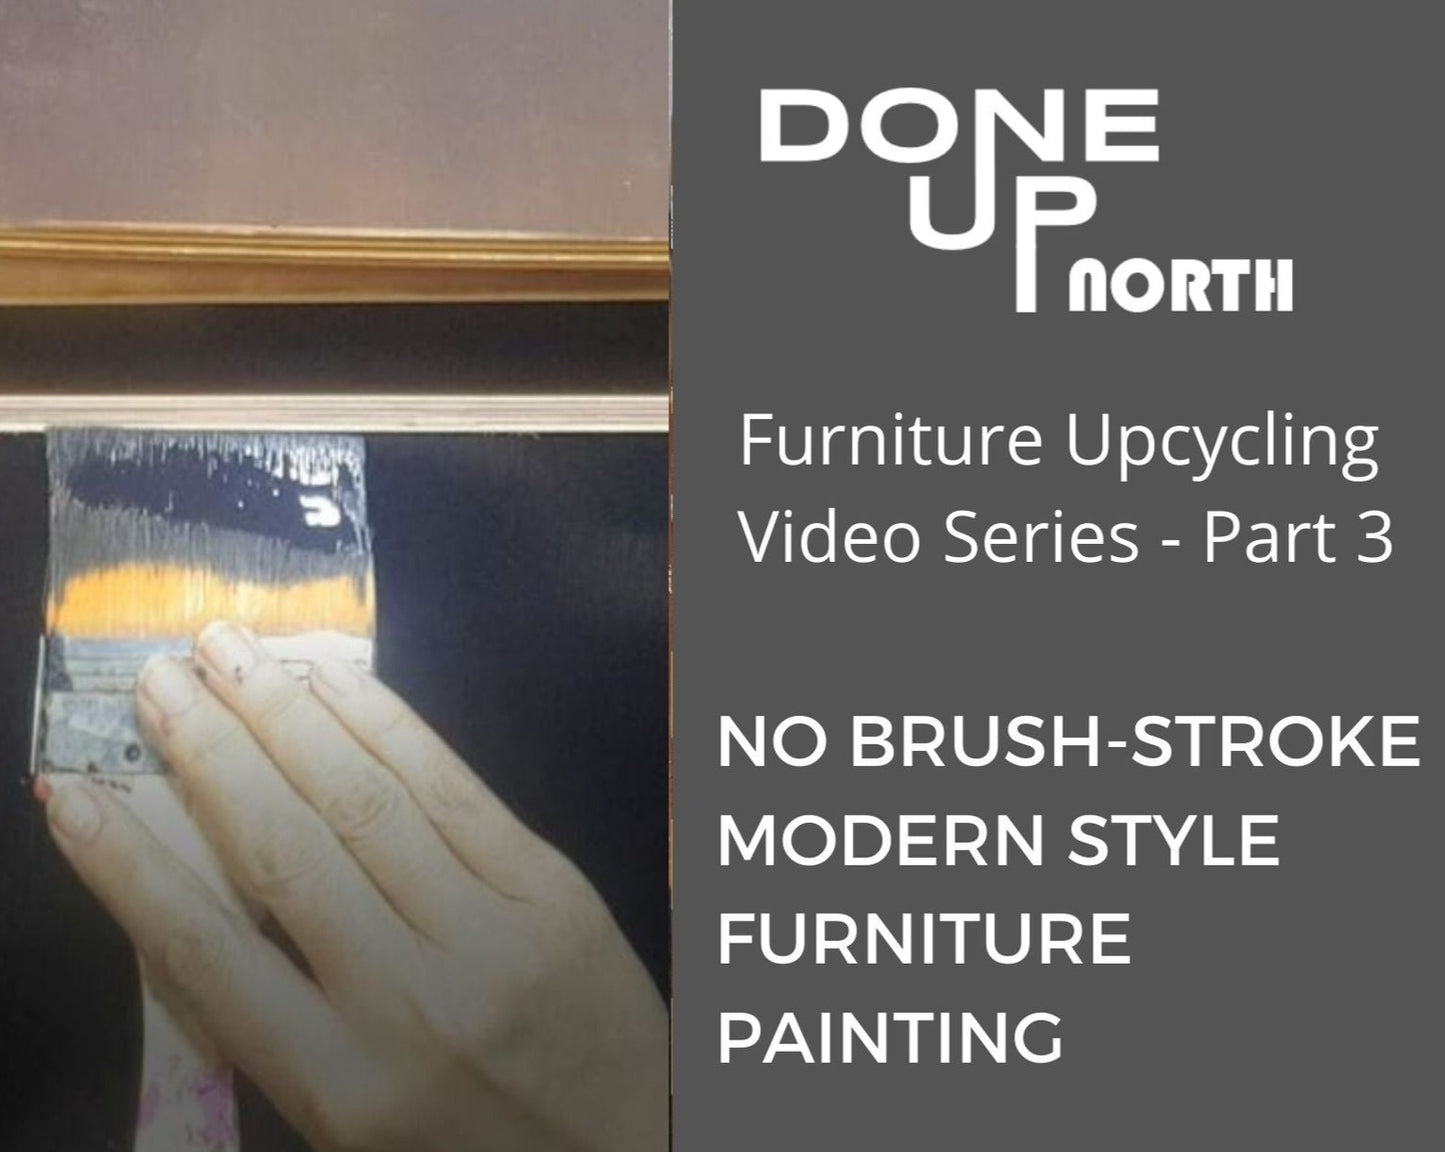 VIDEO CLASS: Super smooth-style Painting